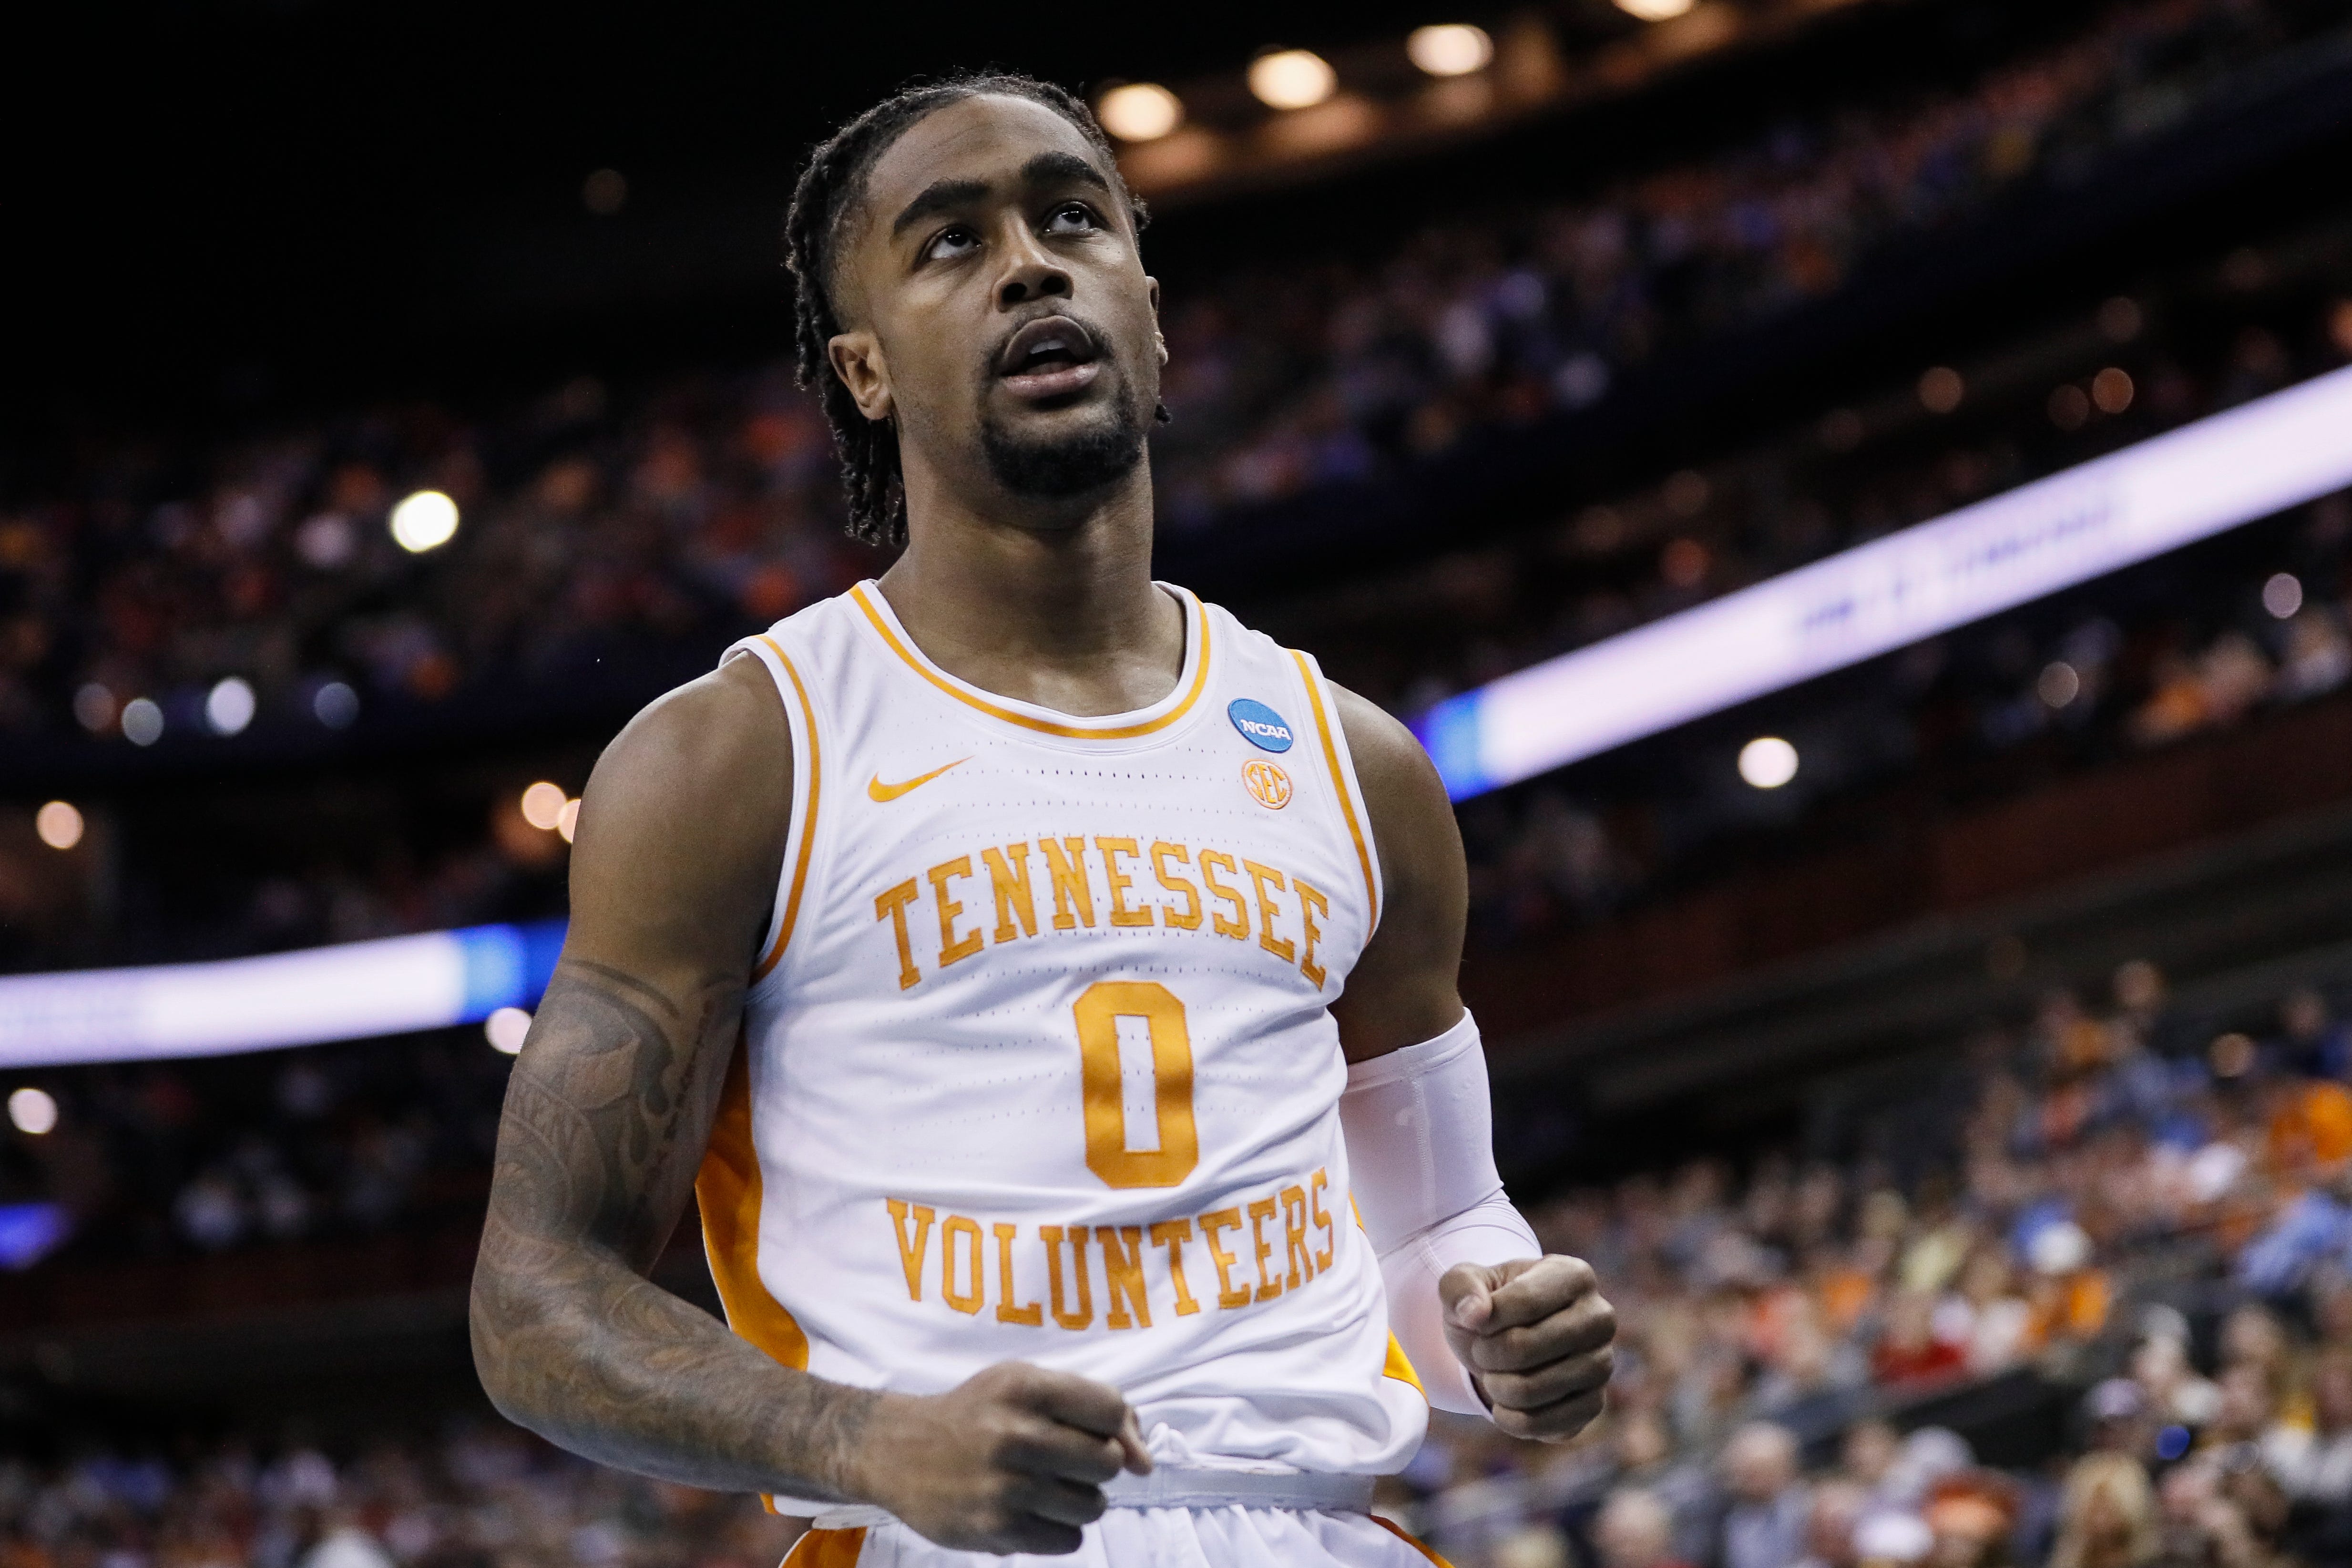 Jordan Bone played three seasons at Tennessee where he averaged 9.7 points, 2.4 rebounds and 4.3 assists.